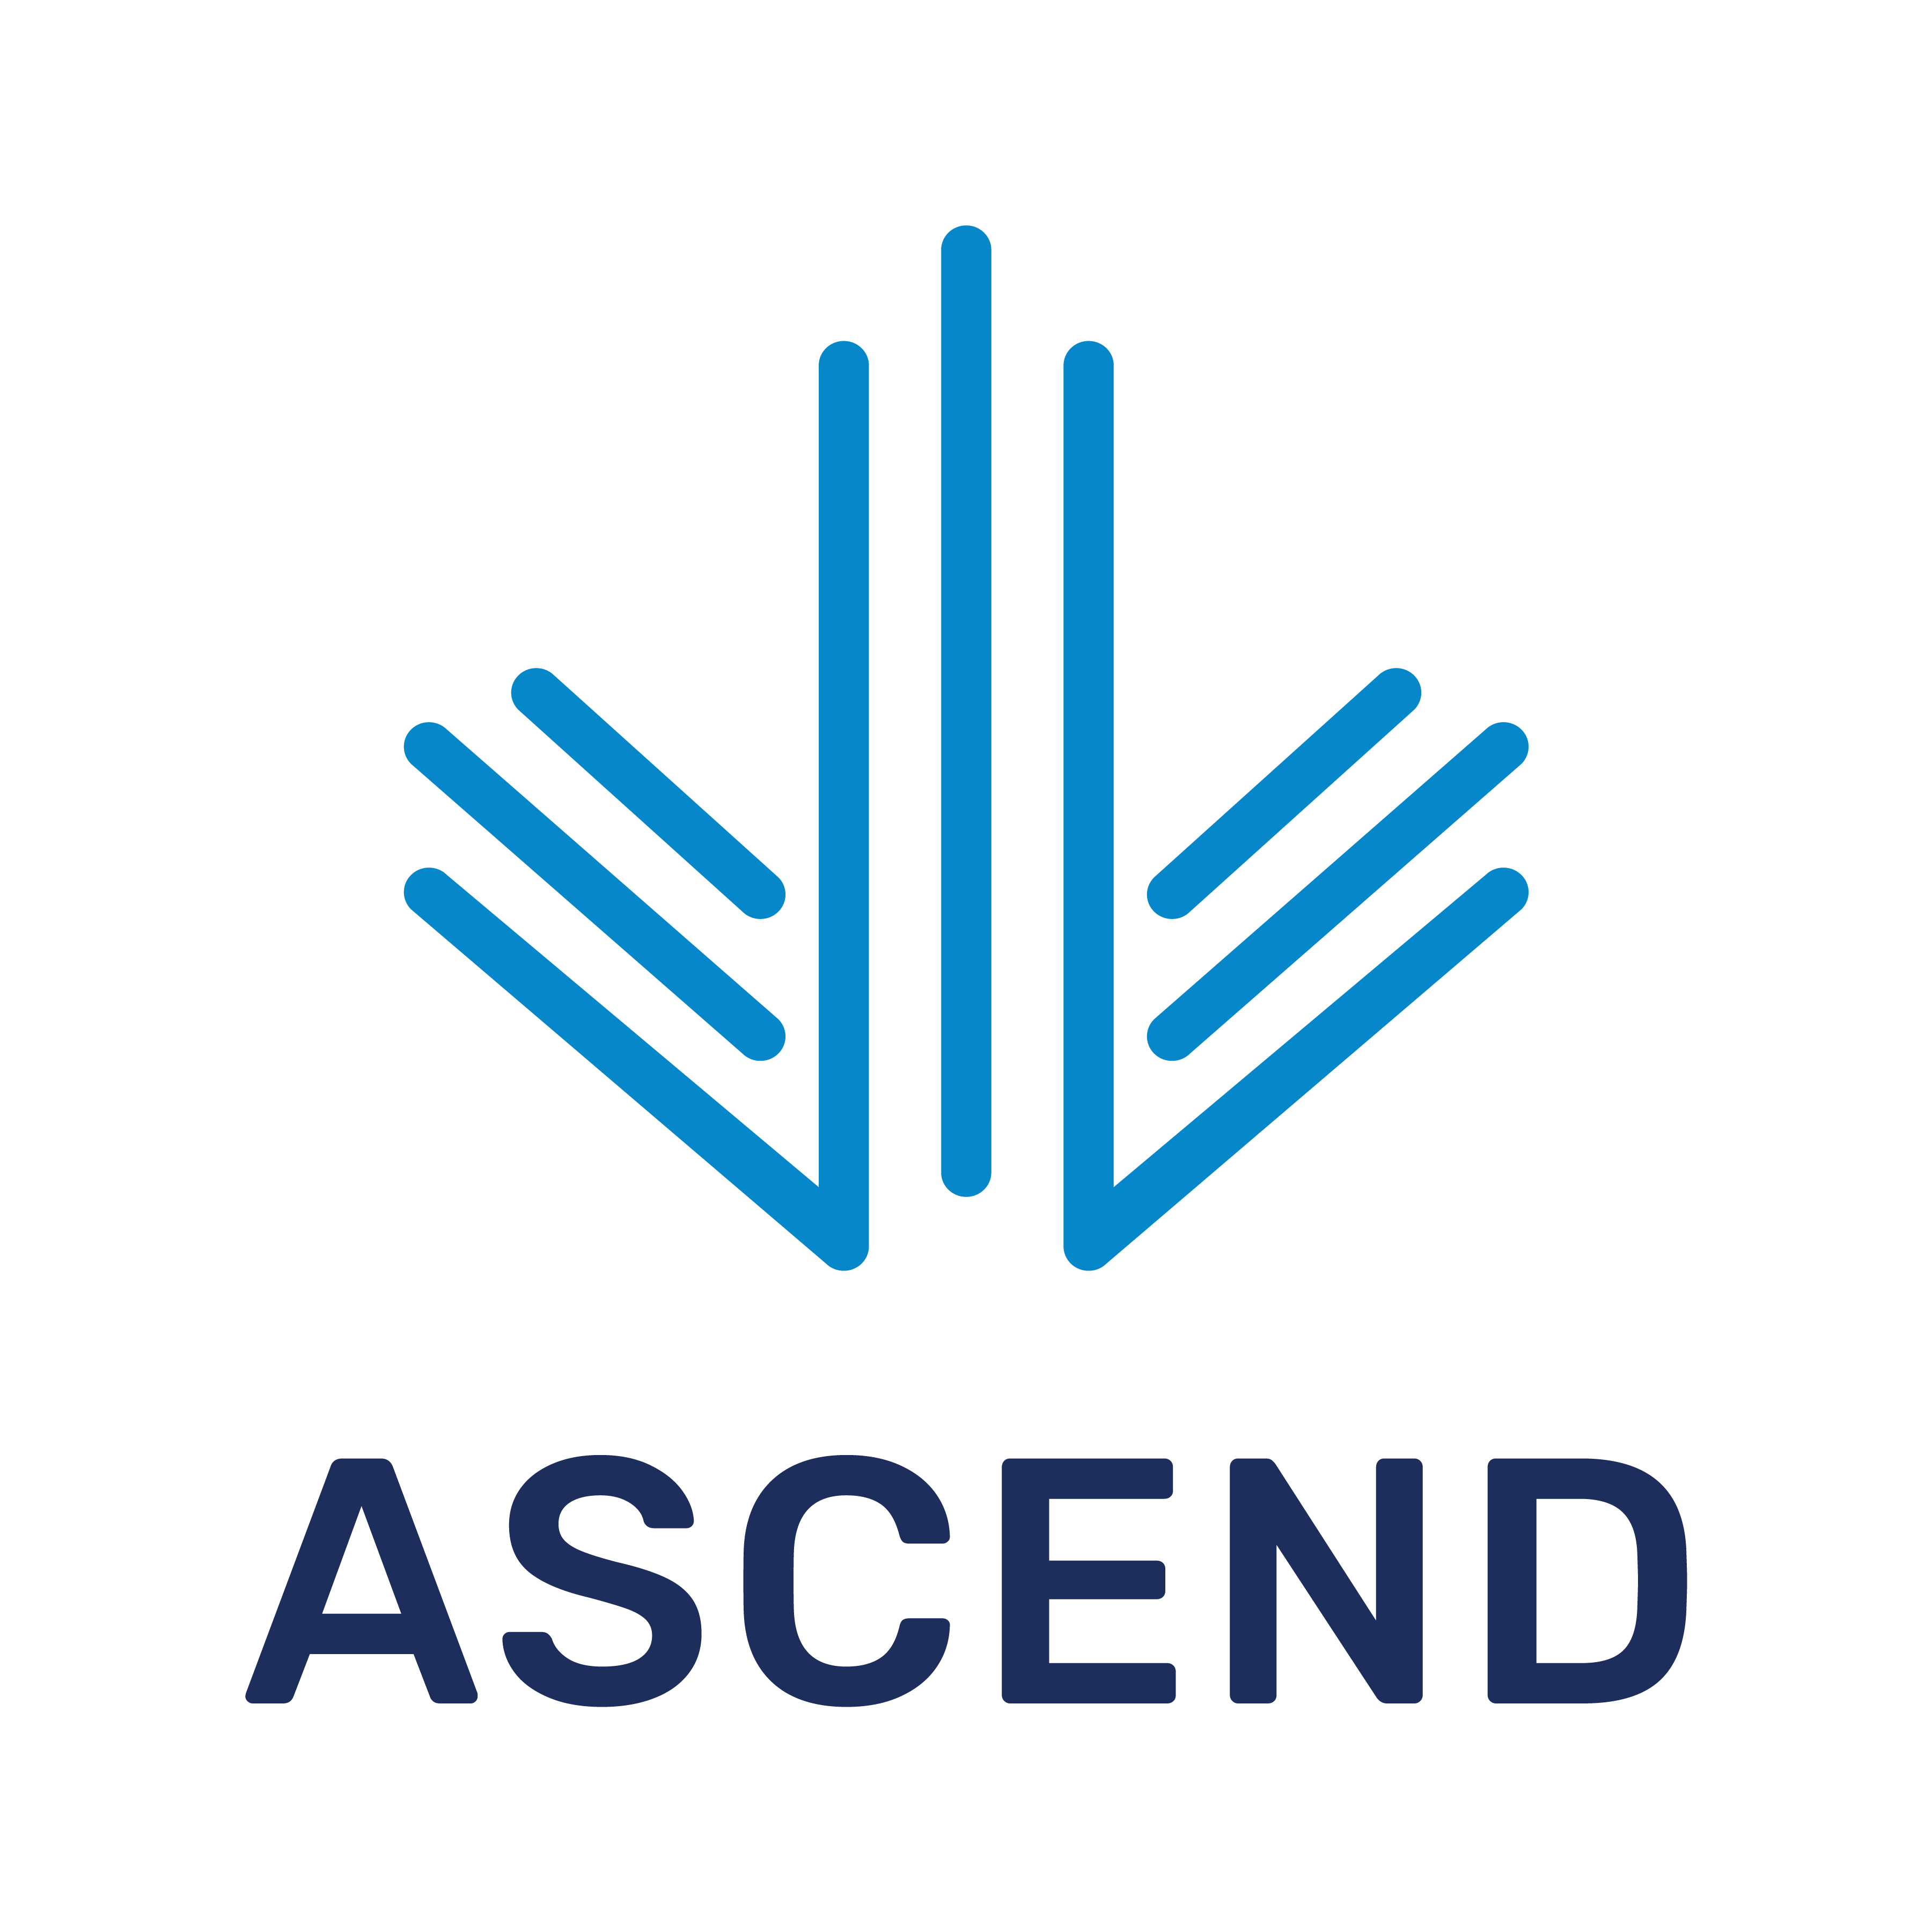 Ascend Cannabis - Fort Lee | Fort Lee, NJ Dispensary | Leafly